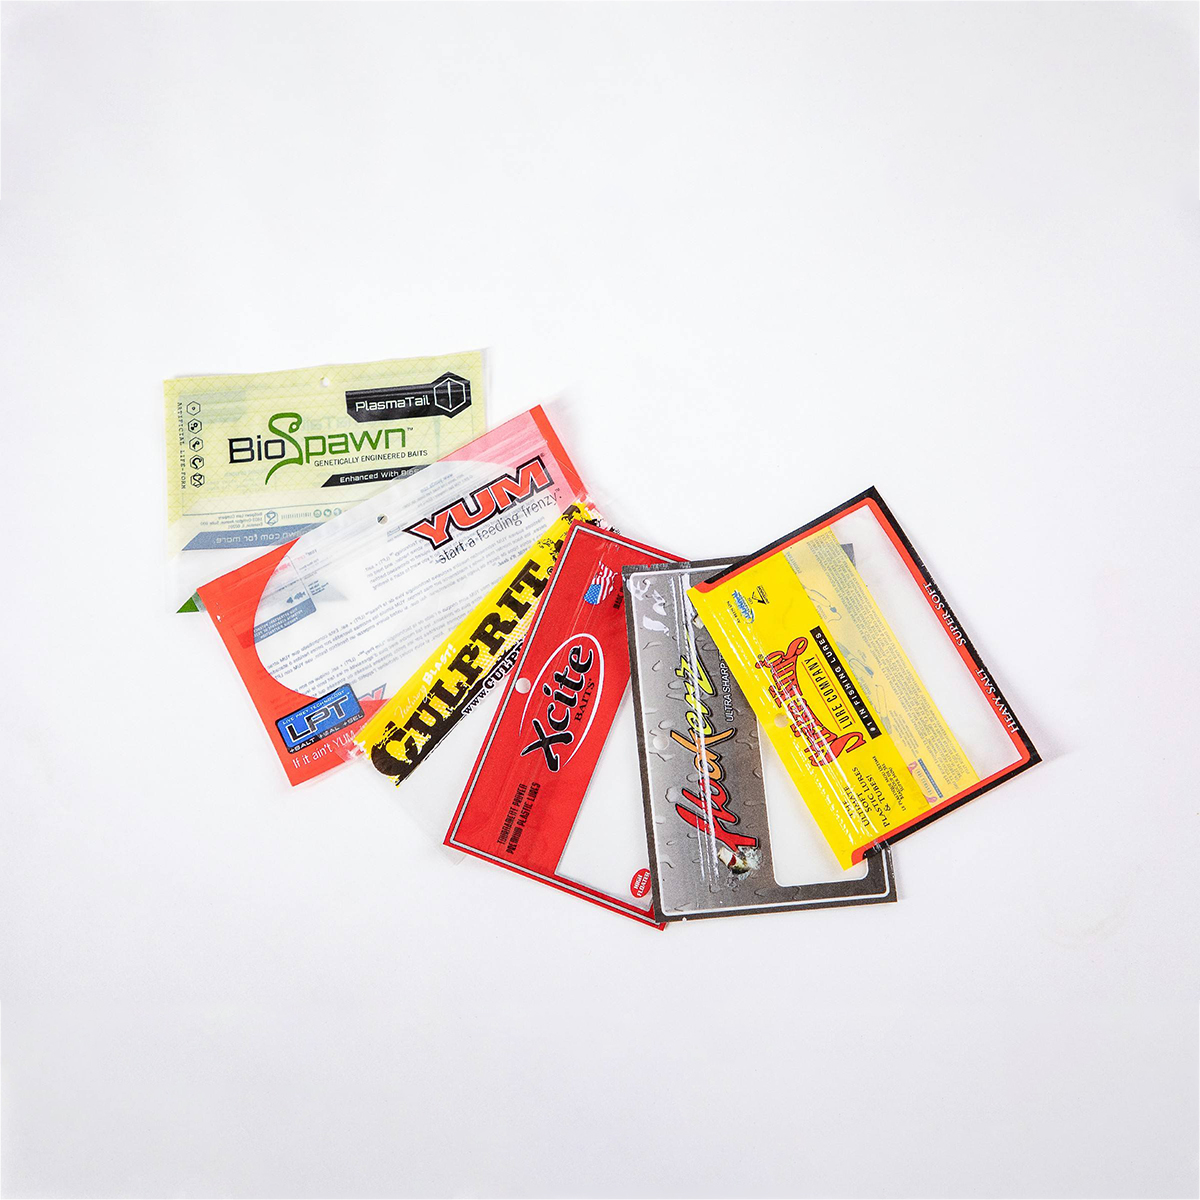 Fishing lure plastic bag Featured Image